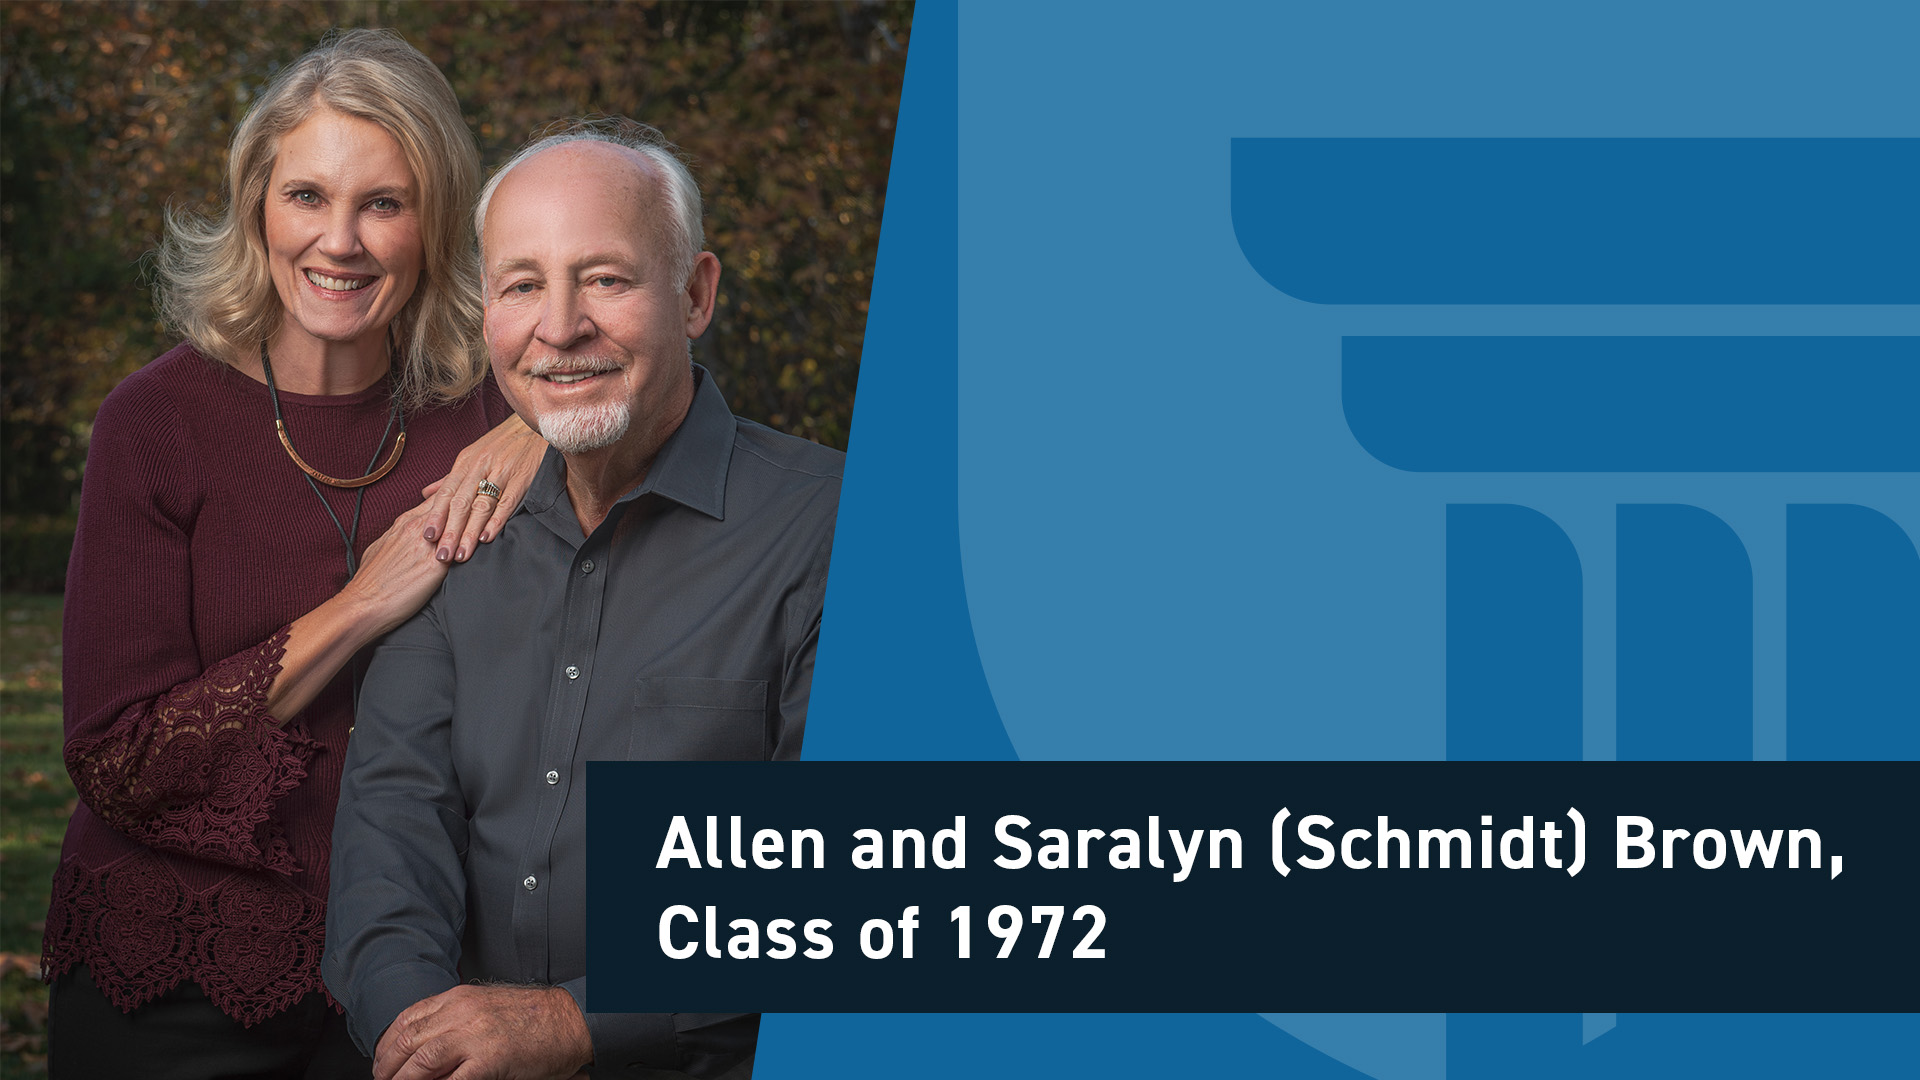 Portrait of Saralyn and Allen Brown